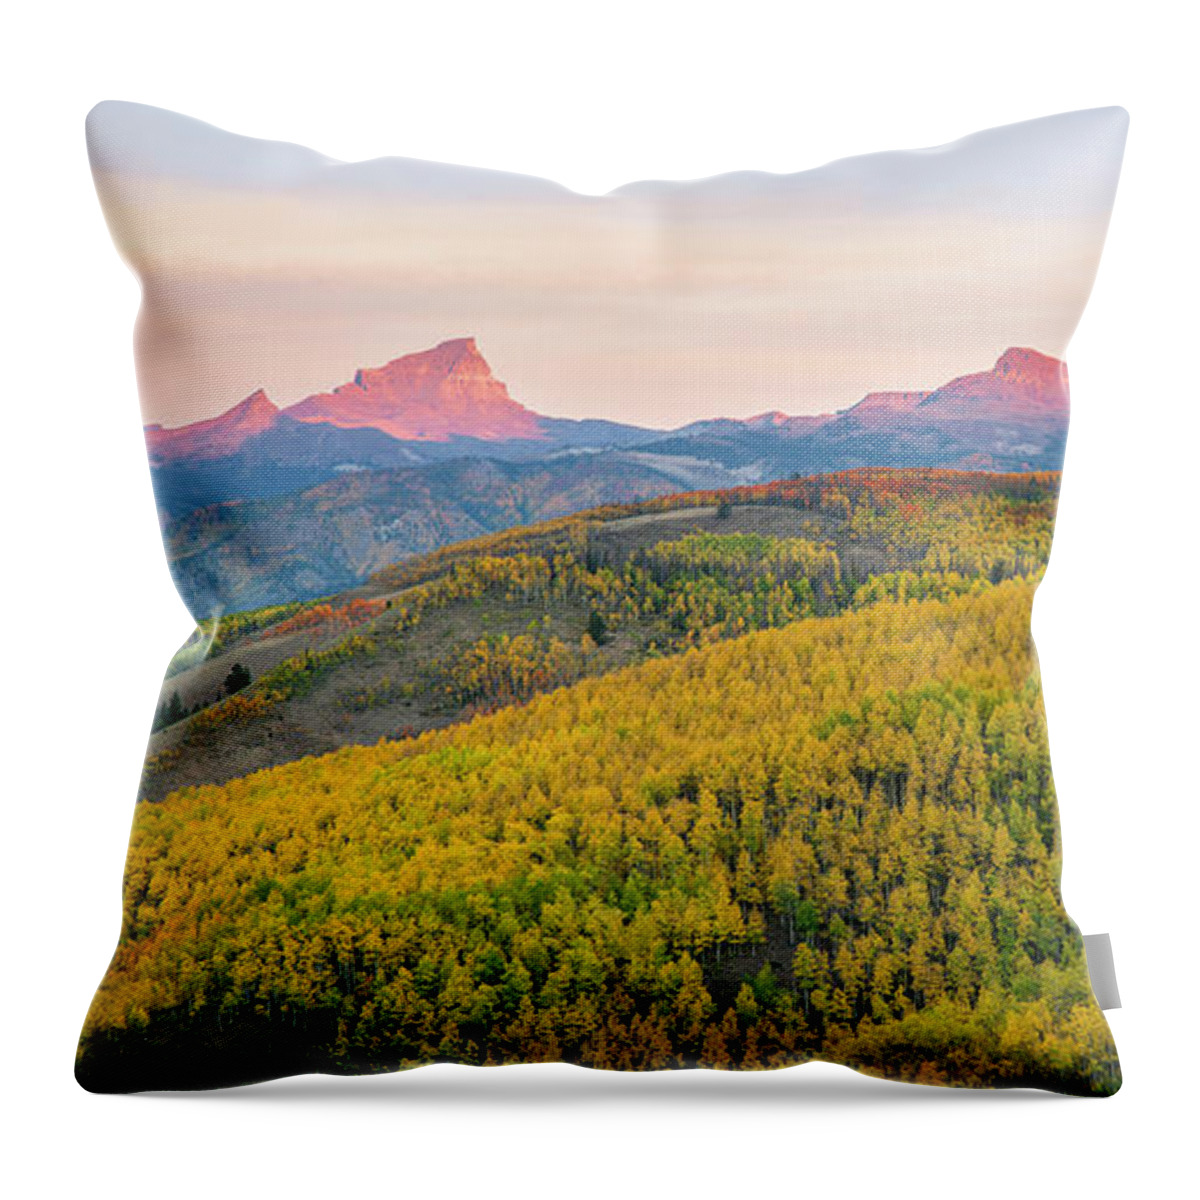 Colorado Throw Pillow featuring the photograph Uncompahgre View Panorama by Aaron Spong